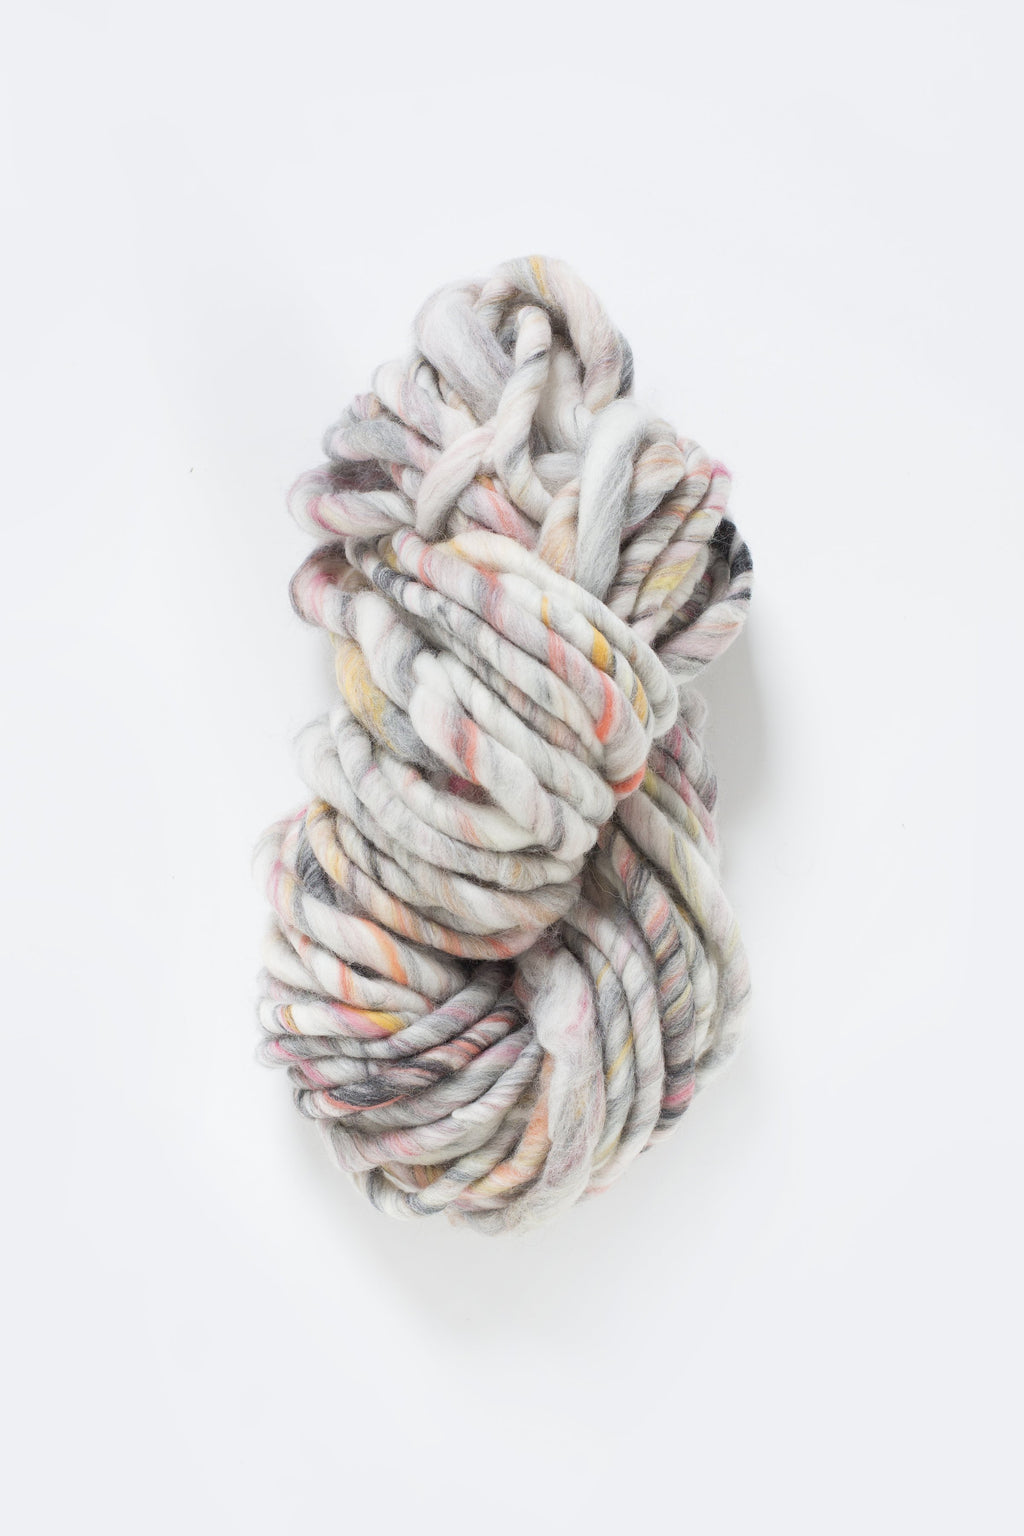 Wanderlust in Free to Be - super bulky and chunky handspun yarn by knit collage